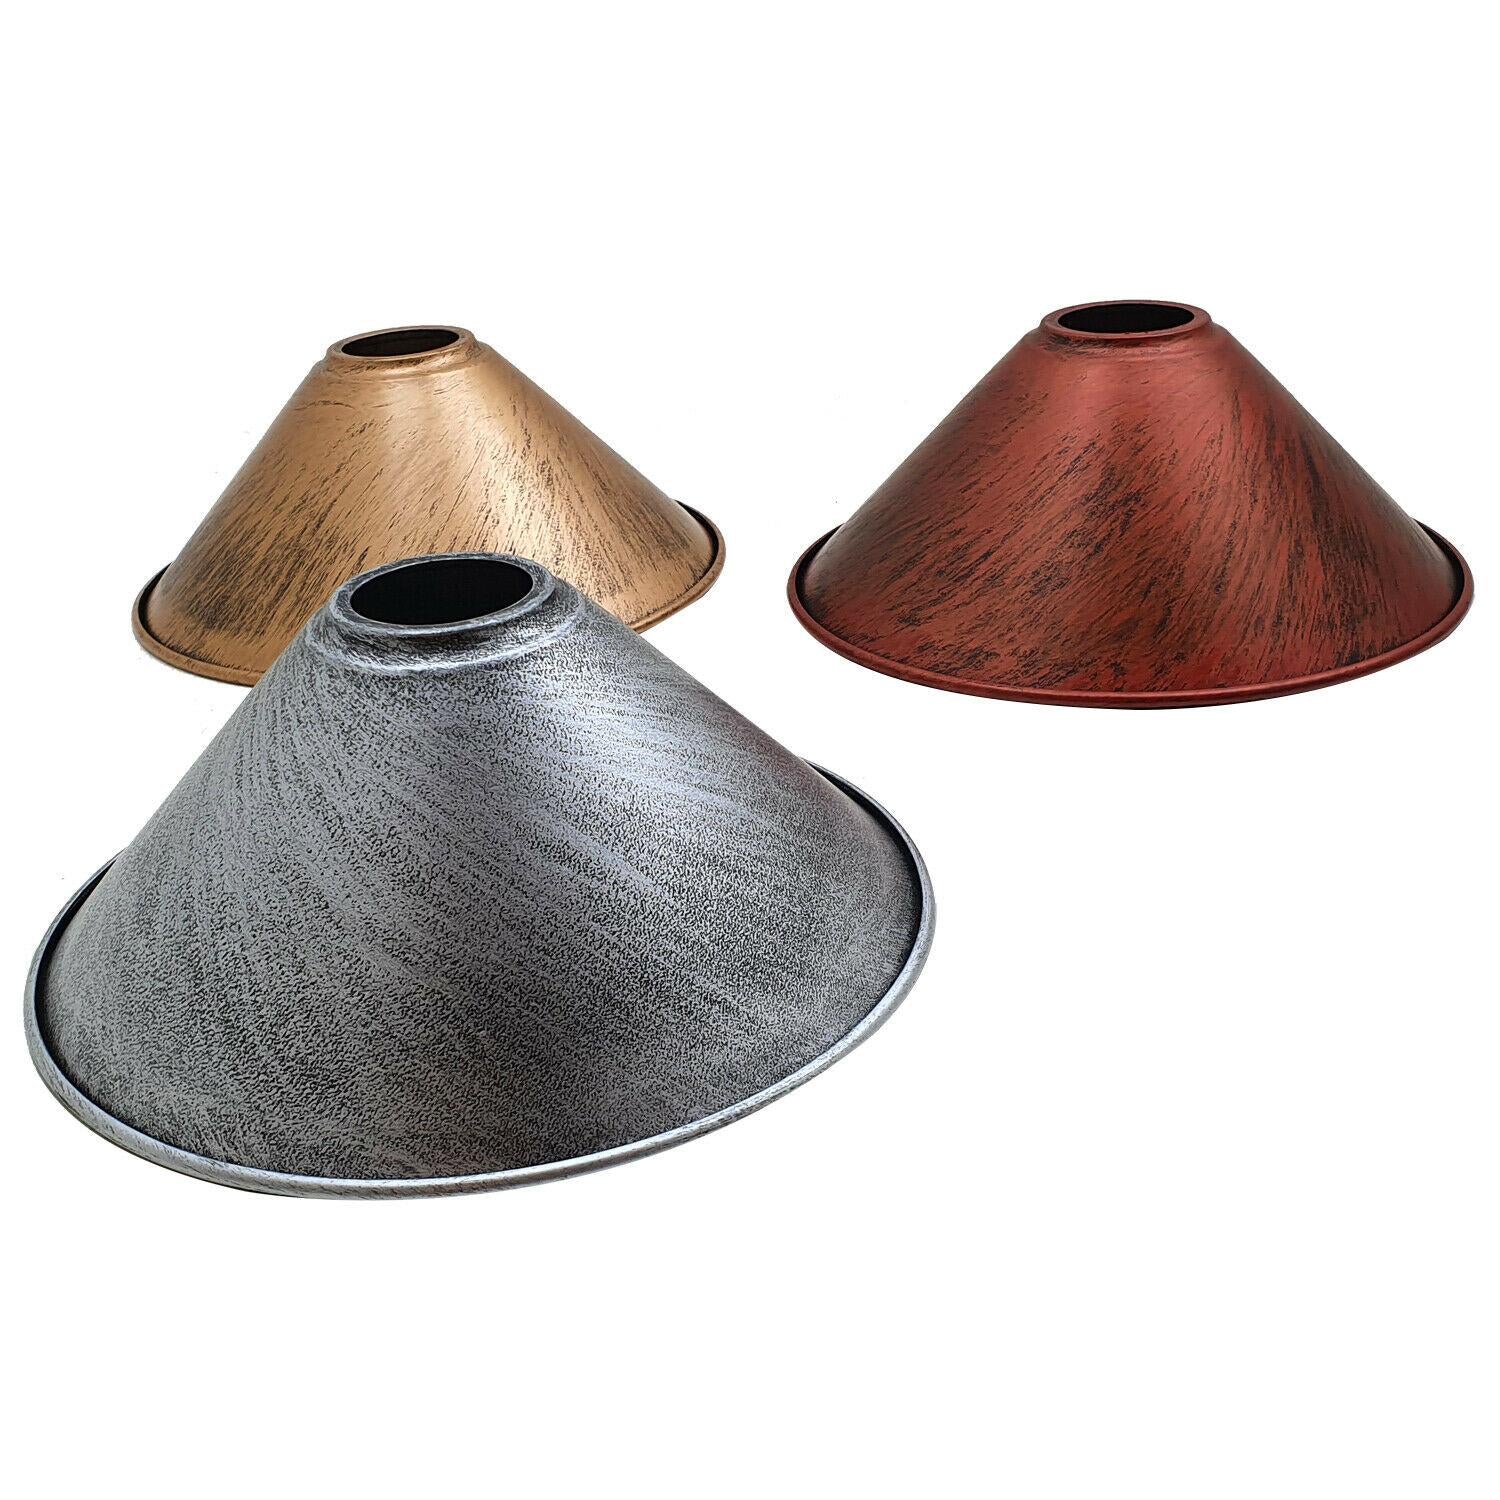 220mm x 10cm Cone Light Shades Metal Easy Fit Ceiling Pendant Hanging Wall Lampshade~1383 - LEDSone UK Ltd